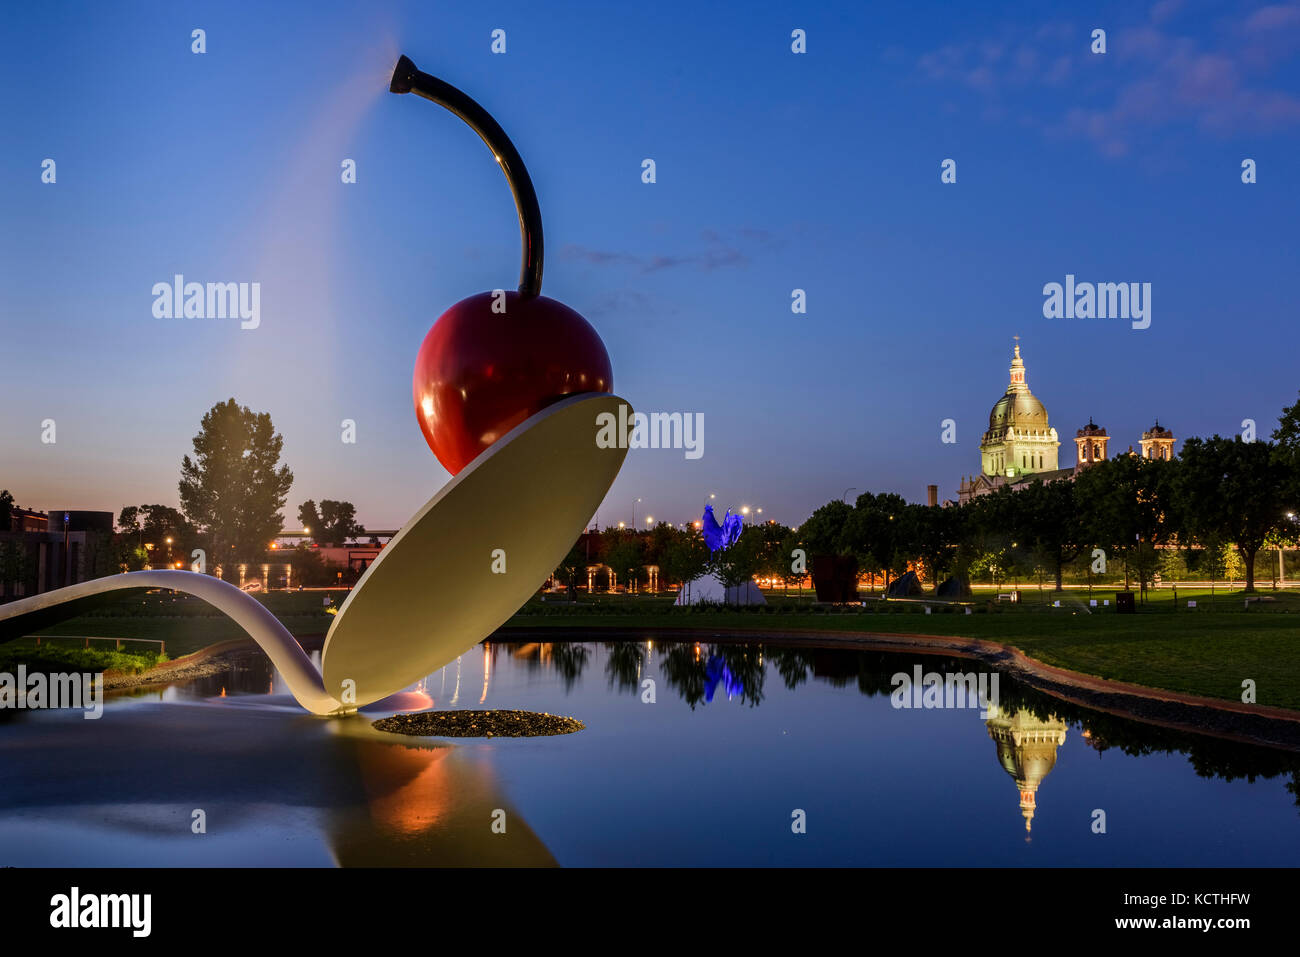 Spoonbridge and Cherry sculpture with the  Basilica of Saint Mary. Stock Photo